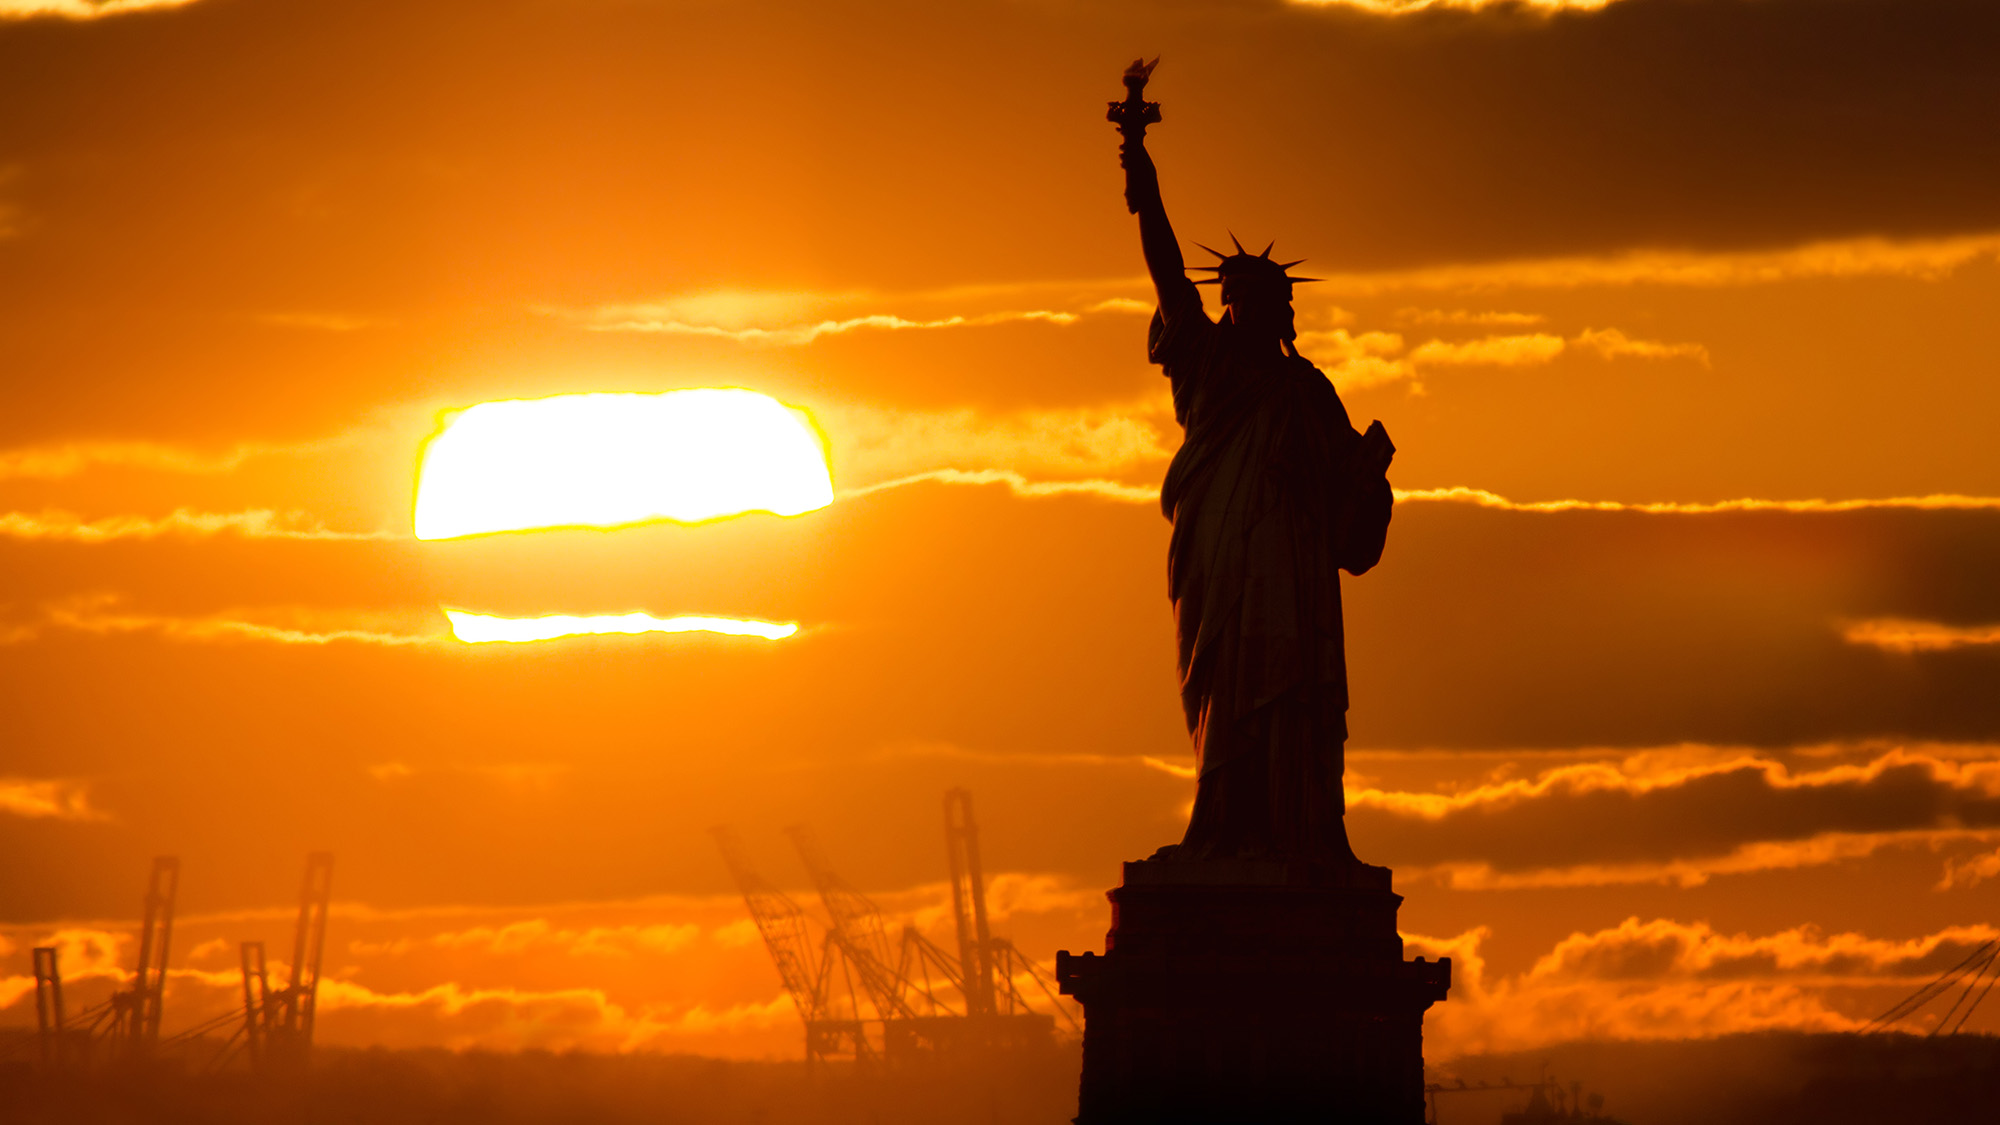 The Statue of Liberty silhouetted against the sunset.